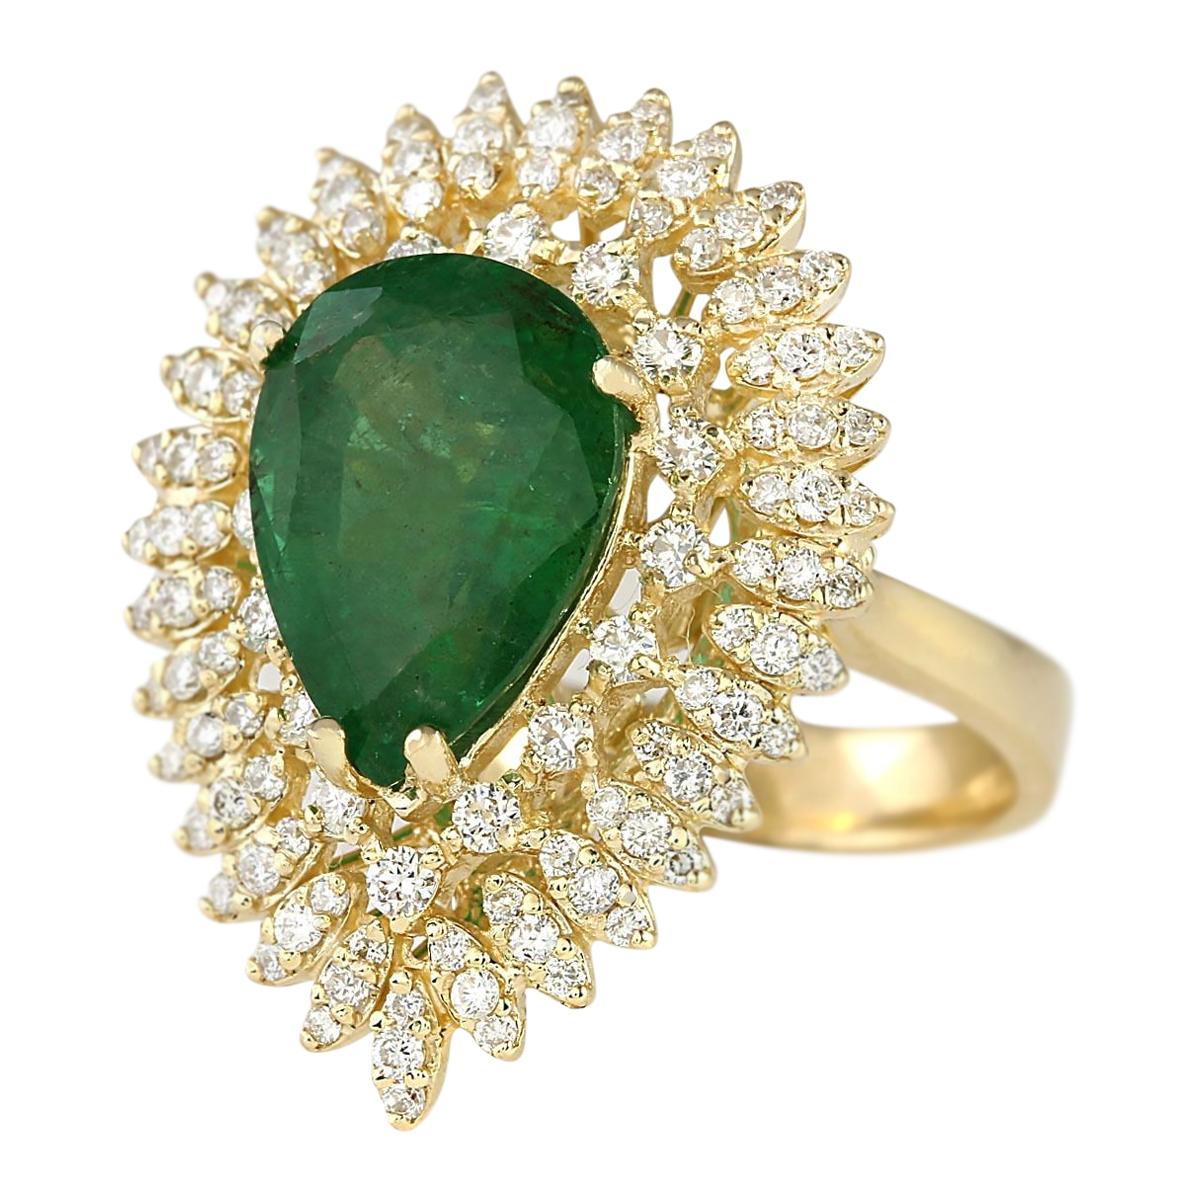 Introducing our breathtaking 14 Karat Yellow Gold Diamond Ring featuring a remarkable 7.82 Carat Emerald as its centerpiece. Stamped with authenticity, this ring is a true testament to elegance and sophistication. Weighing 9.2 grams, it boasts a